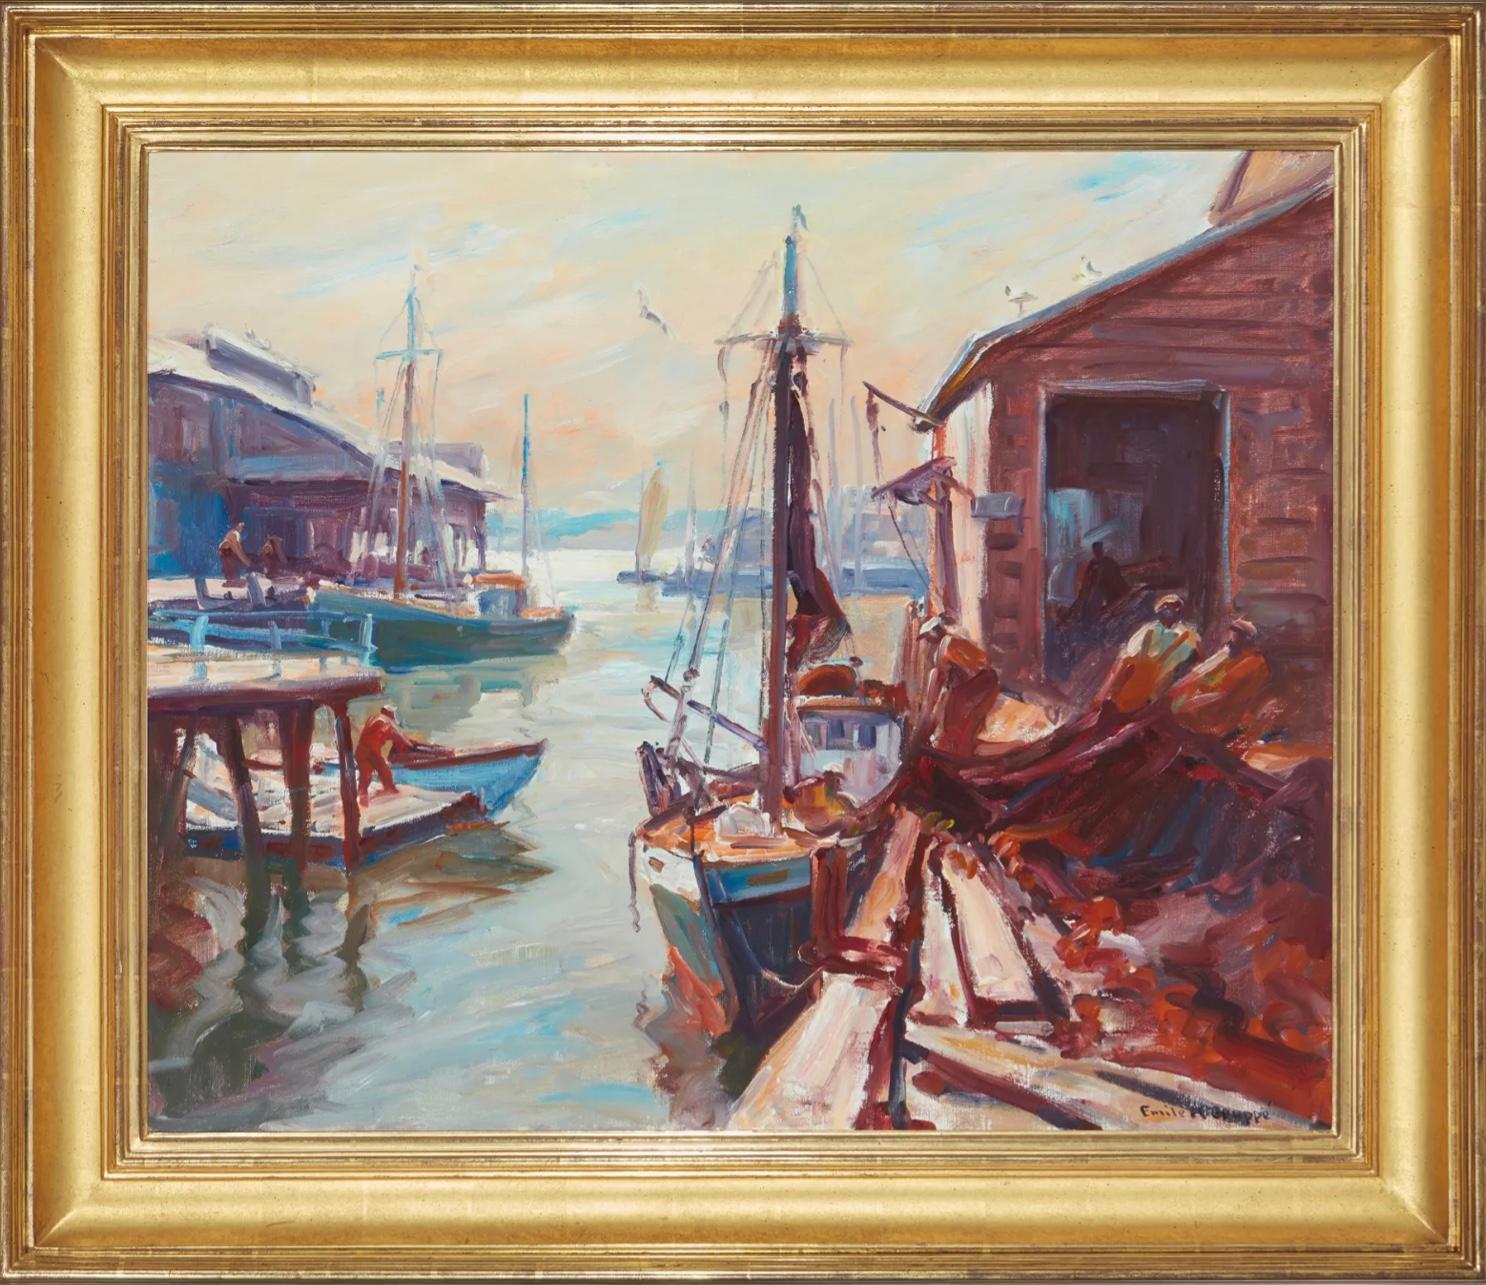 Emile Albert Gruppe (1896-1978)
Hauling in the nets
Oil on canvas
Signed lower right: Emile A. Gruppe
30" H x 36" W

A large and important classic by Gruppe of the Gloucester nautical life during the 1950’s. Gruppe’s signature paint color pallet is